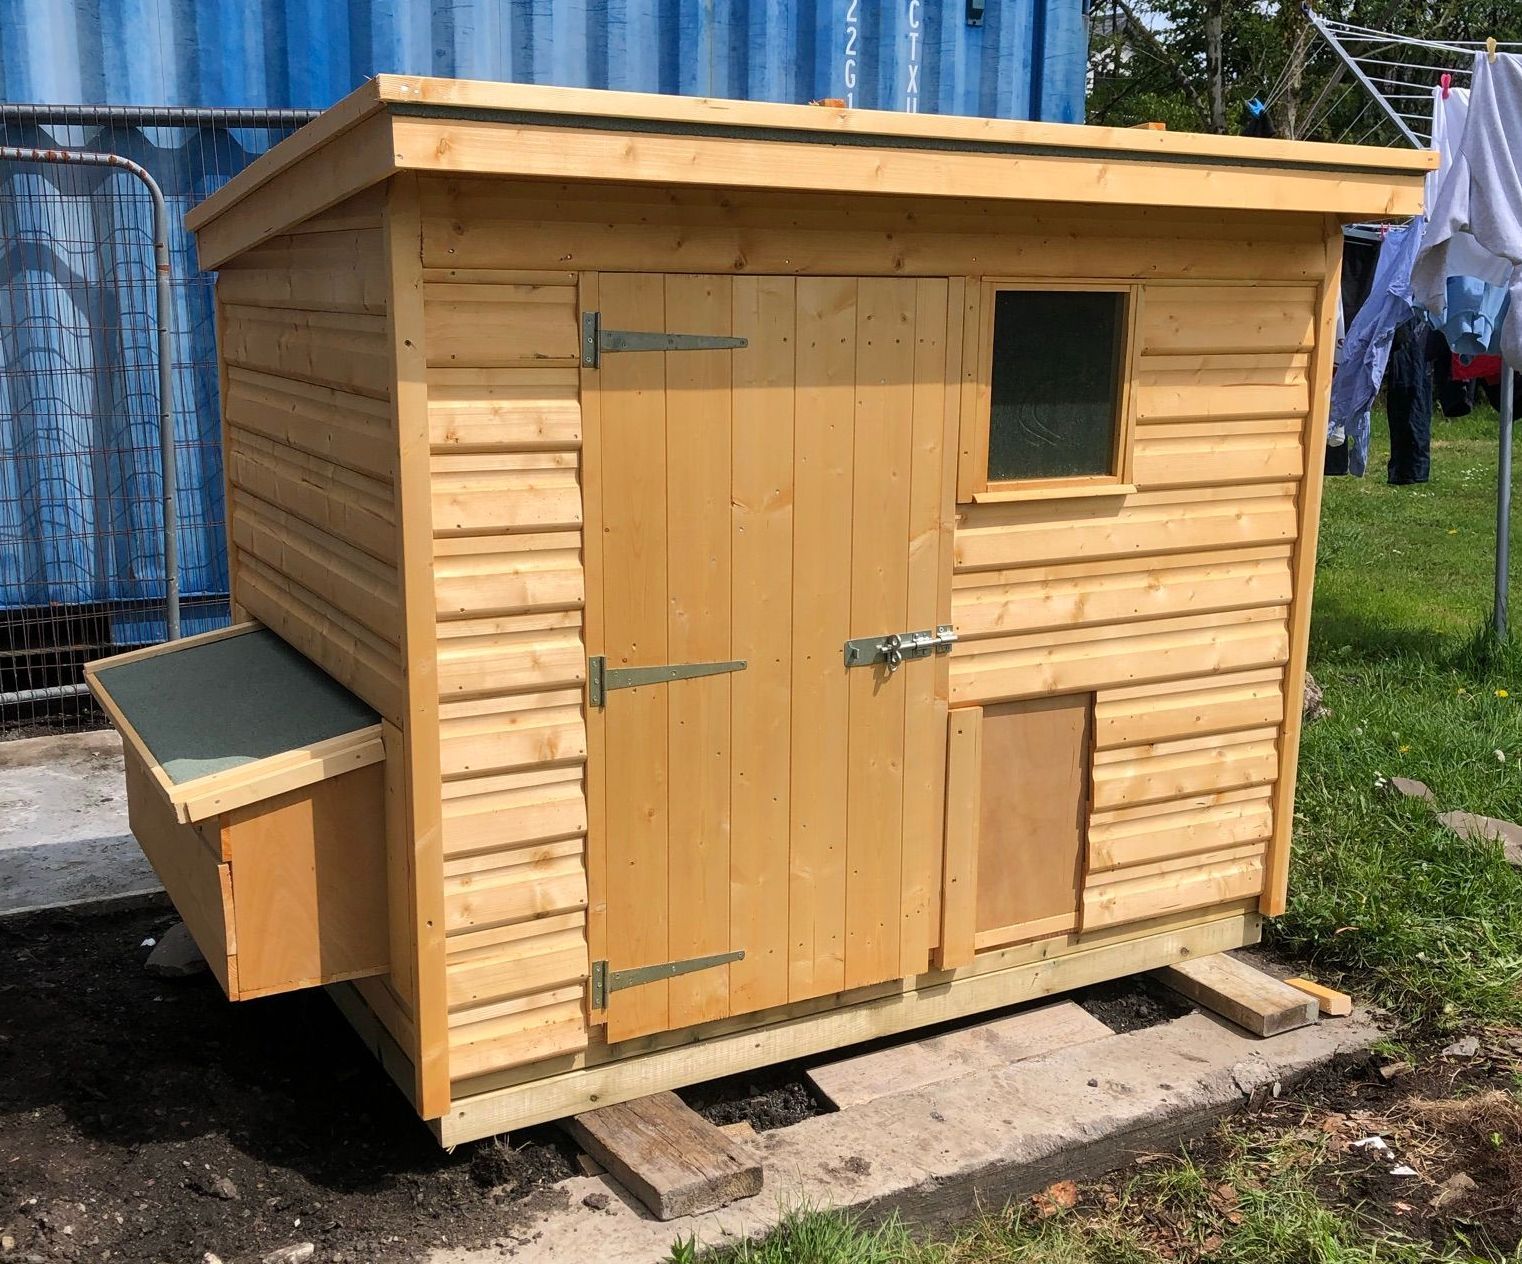 6' x 4' Low height chicken shed pent style. with nest box and shutter. Door for access inside to clean out. Small window to view.